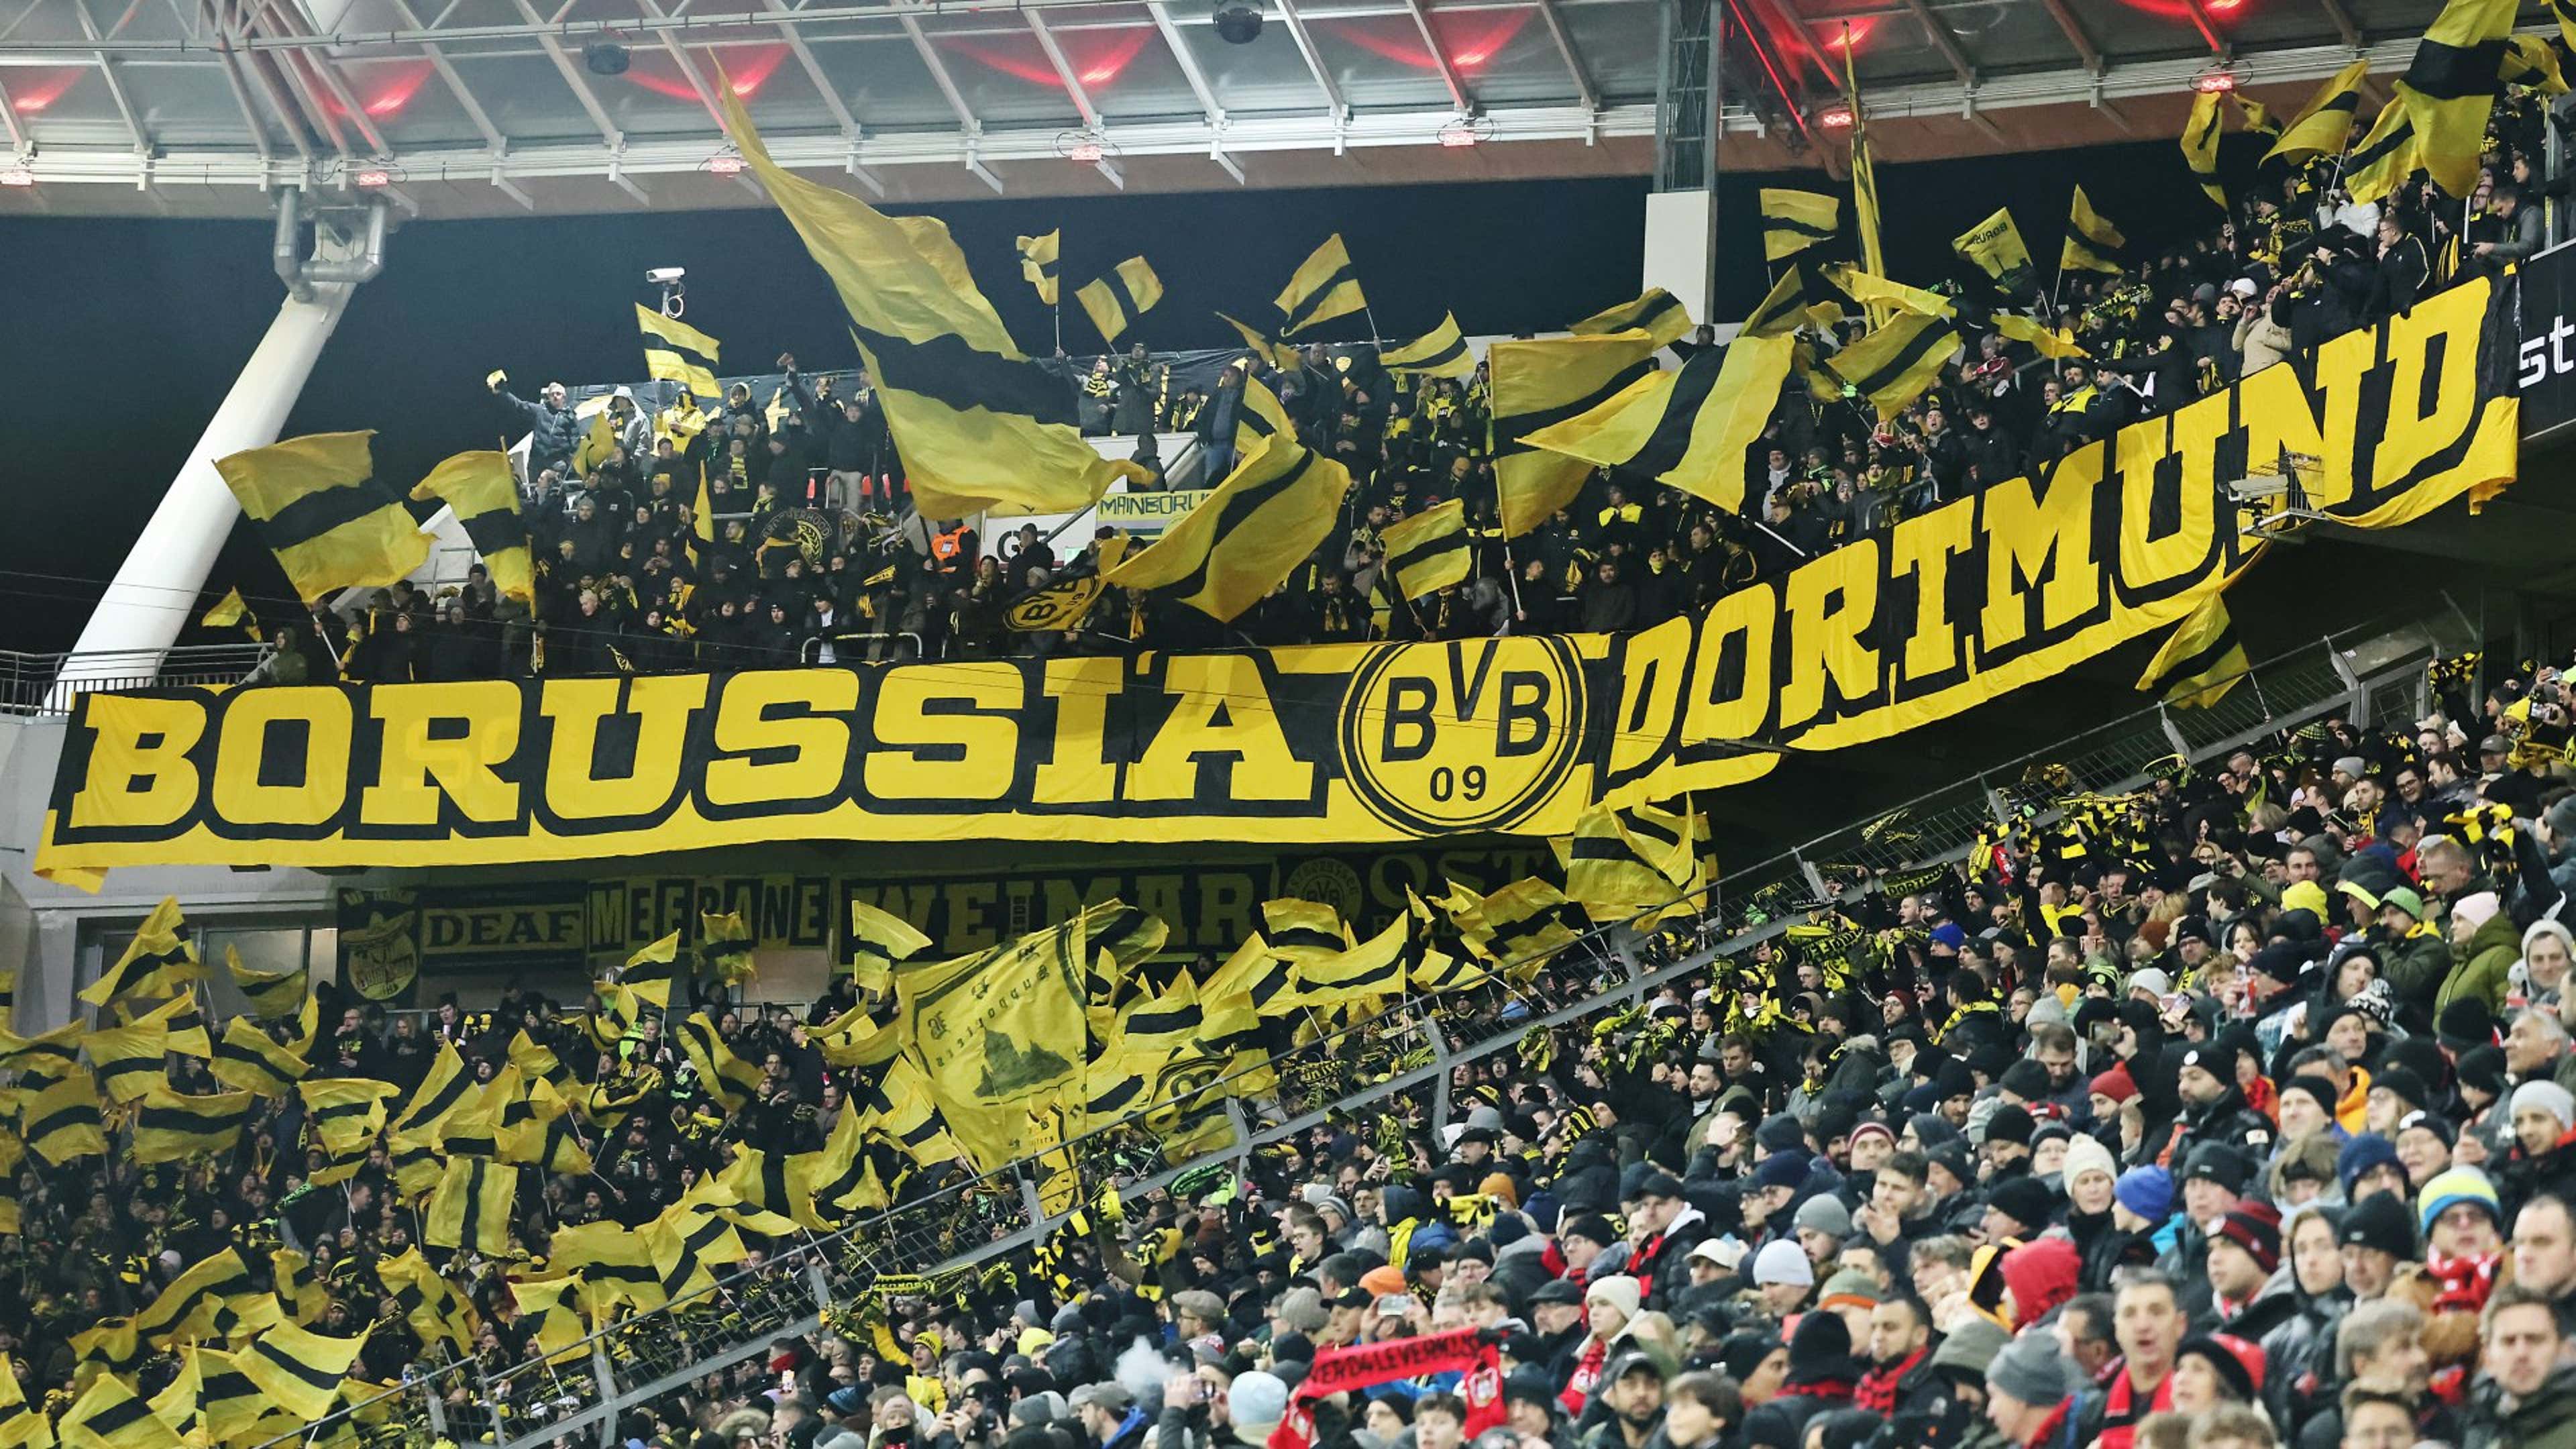 5 reasons to look forward to the year 2023 in the Bundesliga